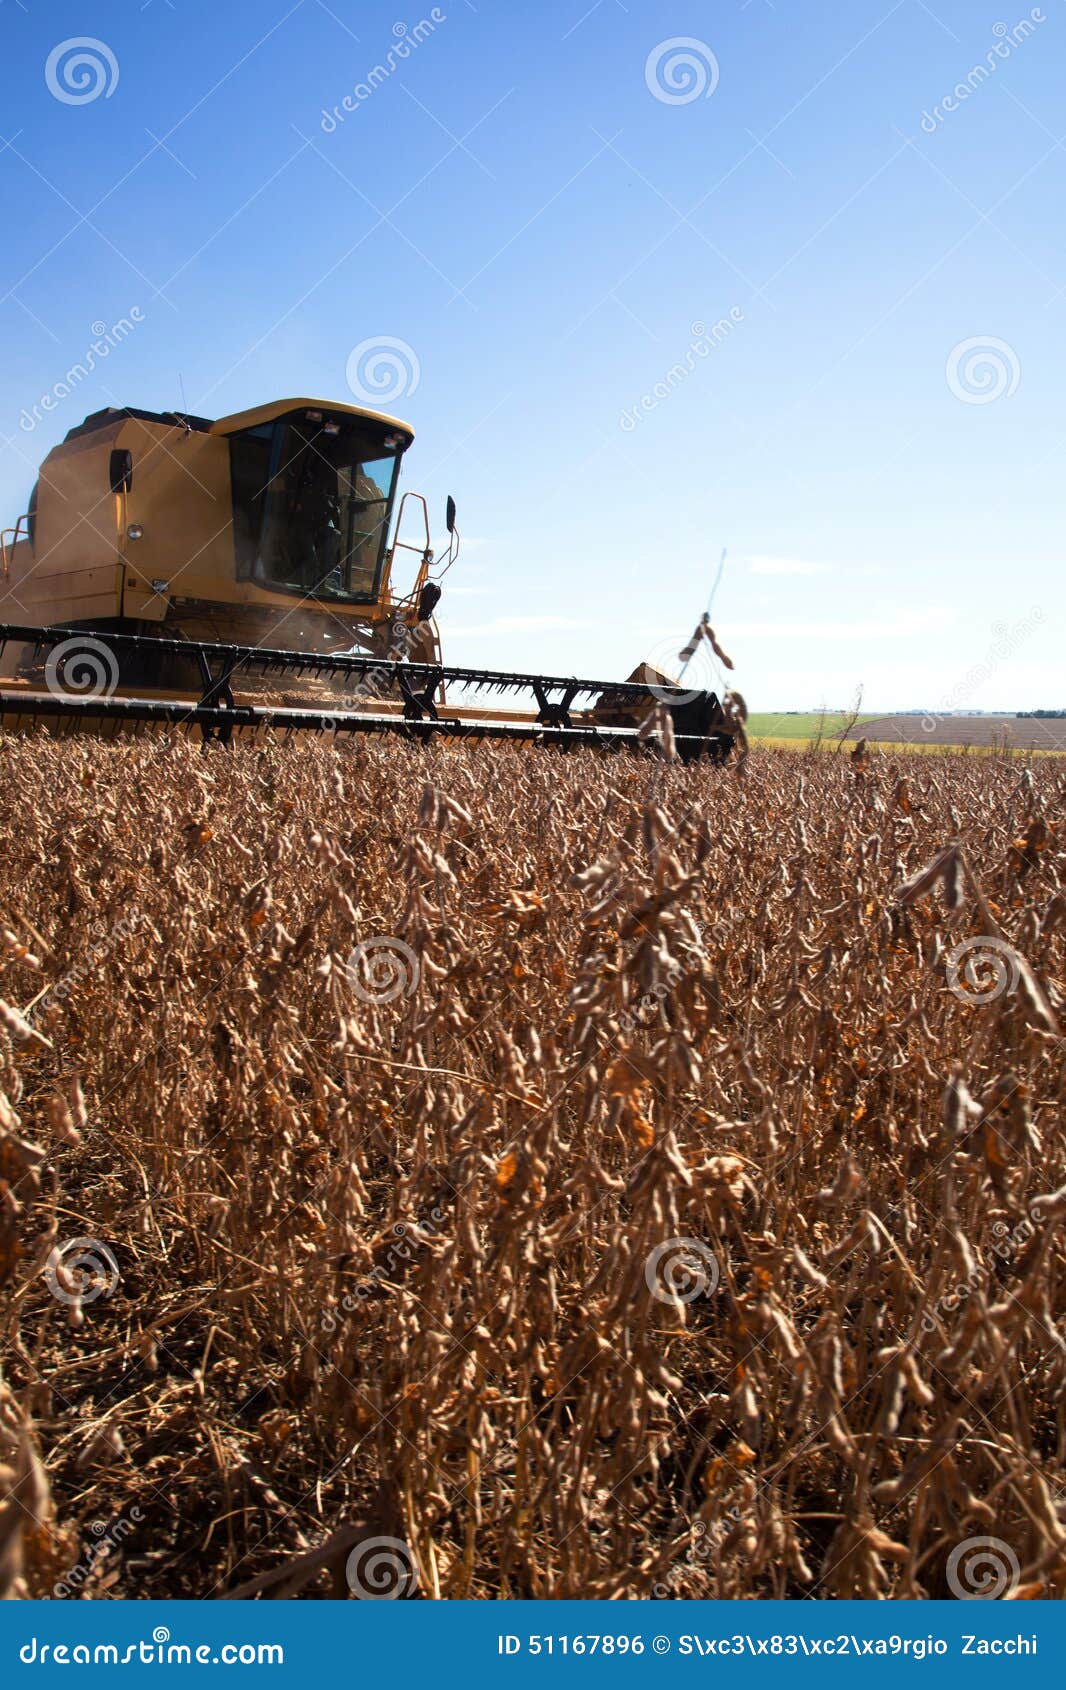 harvester making harvesting soybean field - mato grosso state -